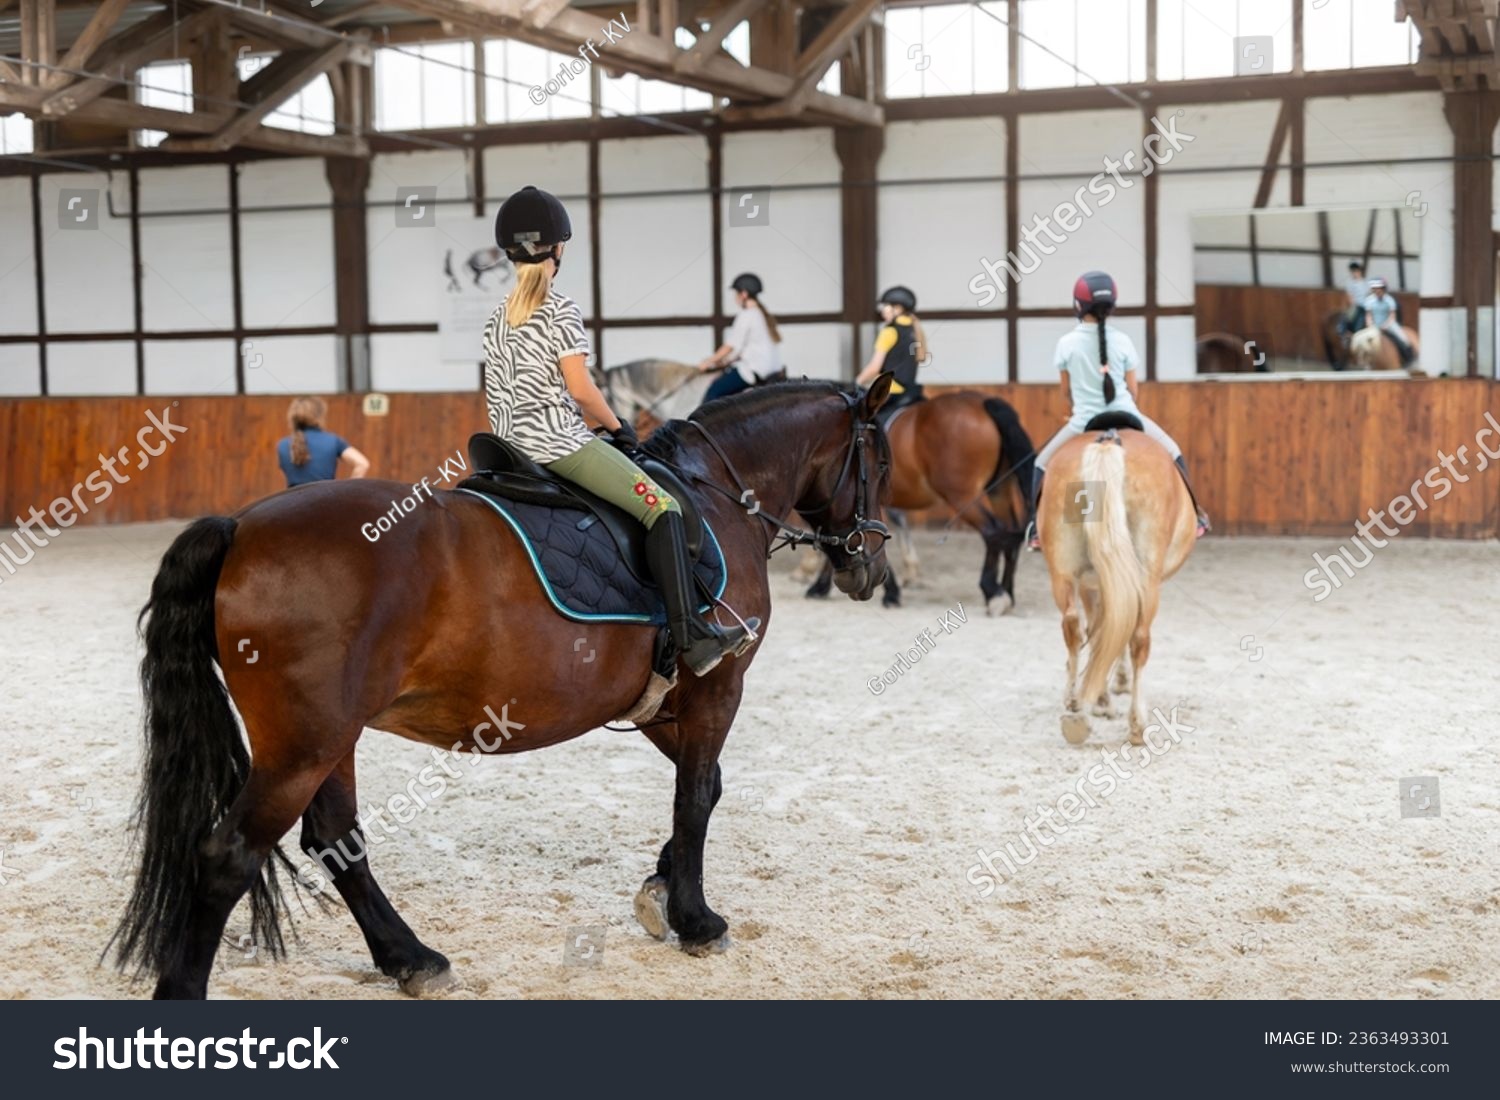 Horse riding school. Little children girls at group training equestrian lessons in indoor ranch horse riding hall. Cute little beginner blond girl kid in helmet sitting on brown horse horseback #2363493301